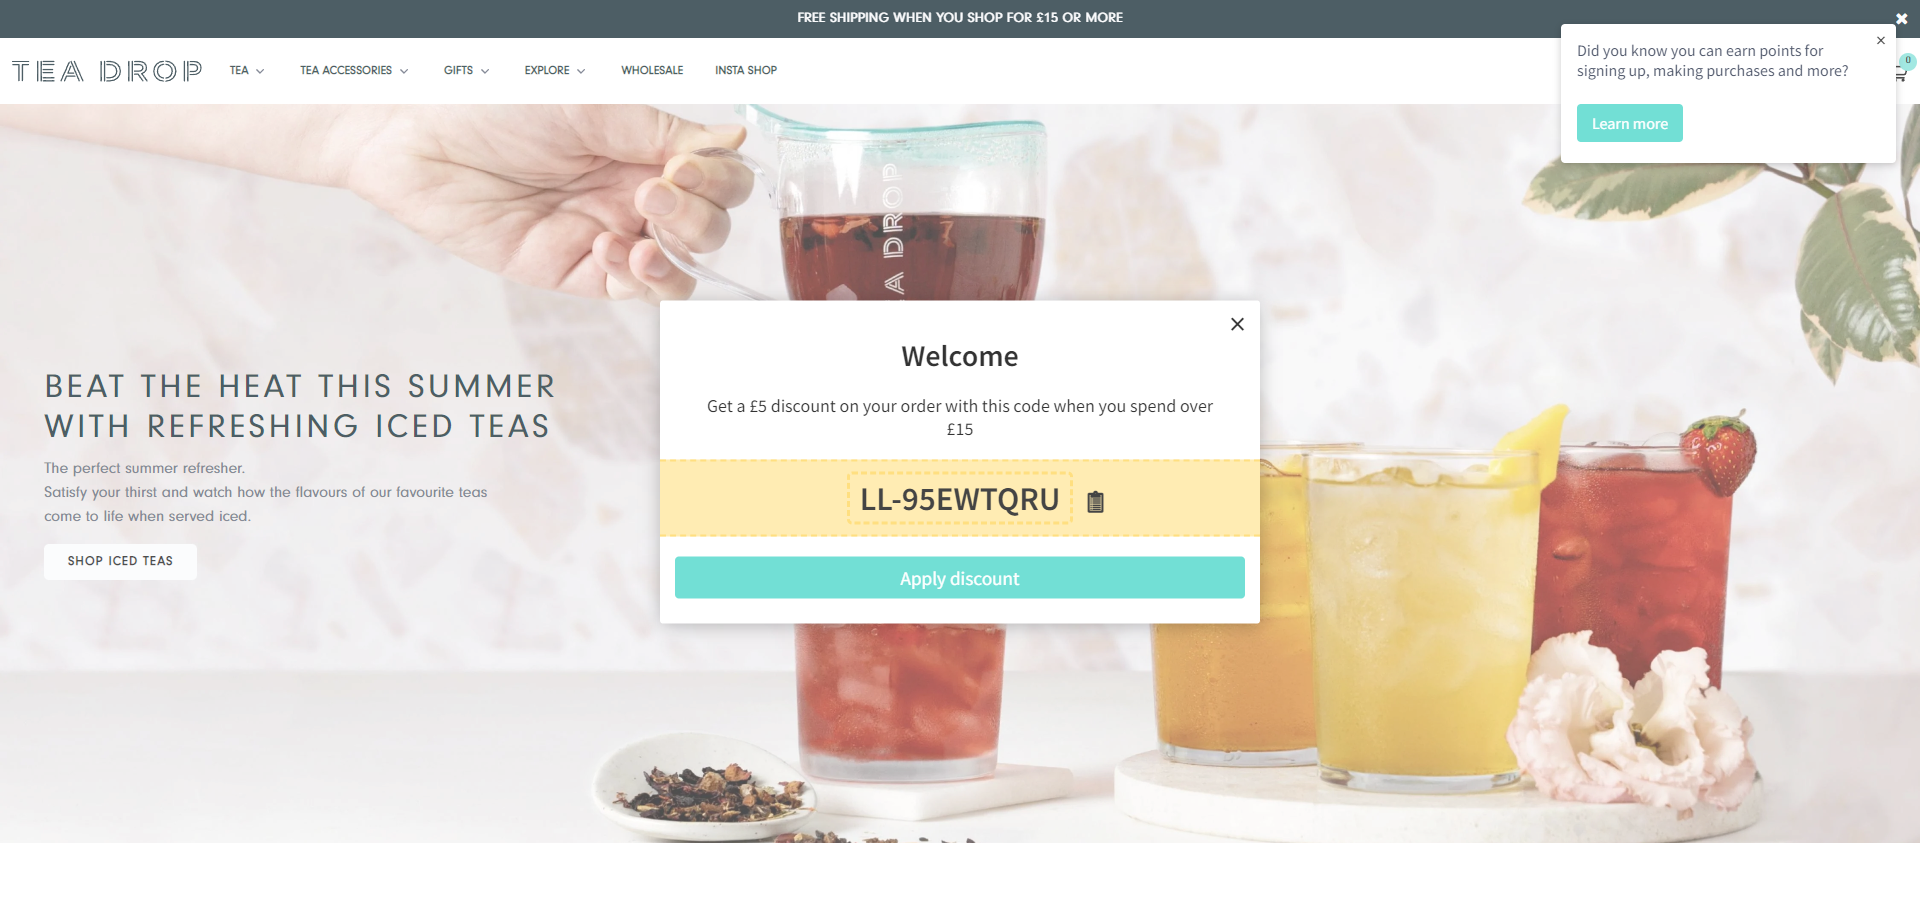 Referral Landing Page for Tea Drop